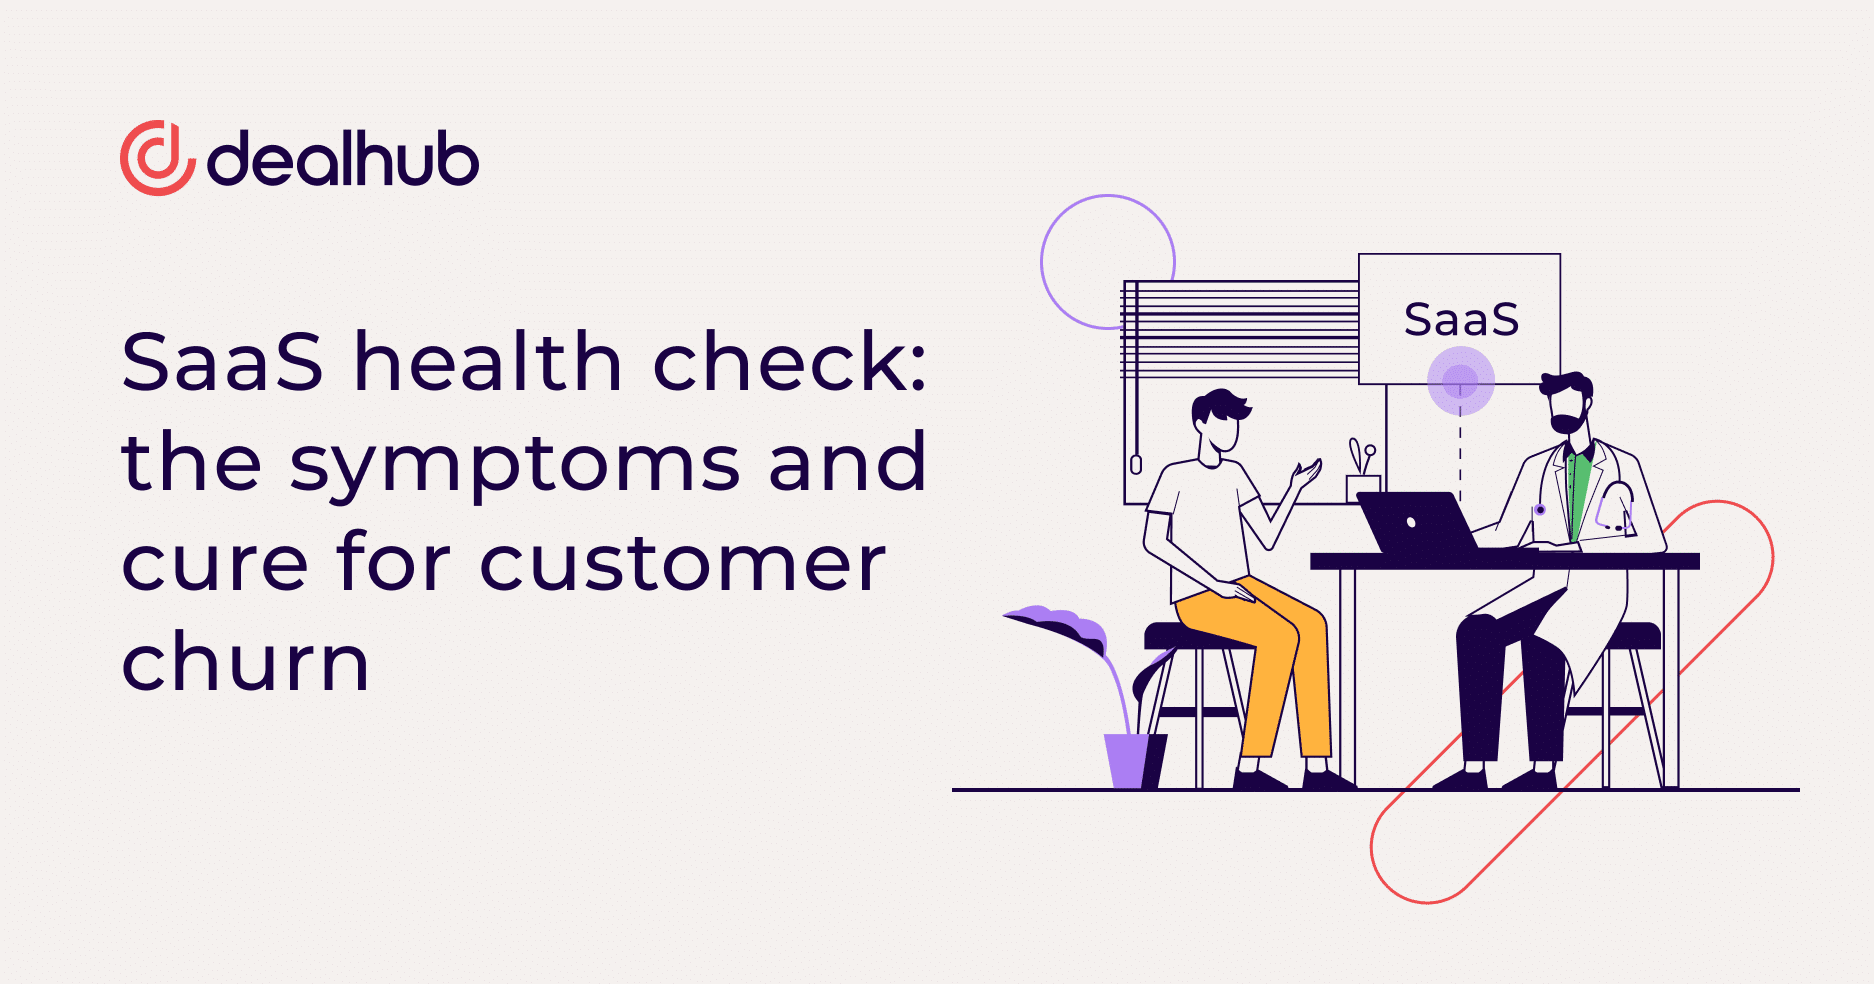 SaaS health check: the symptoms and cure for customer churn